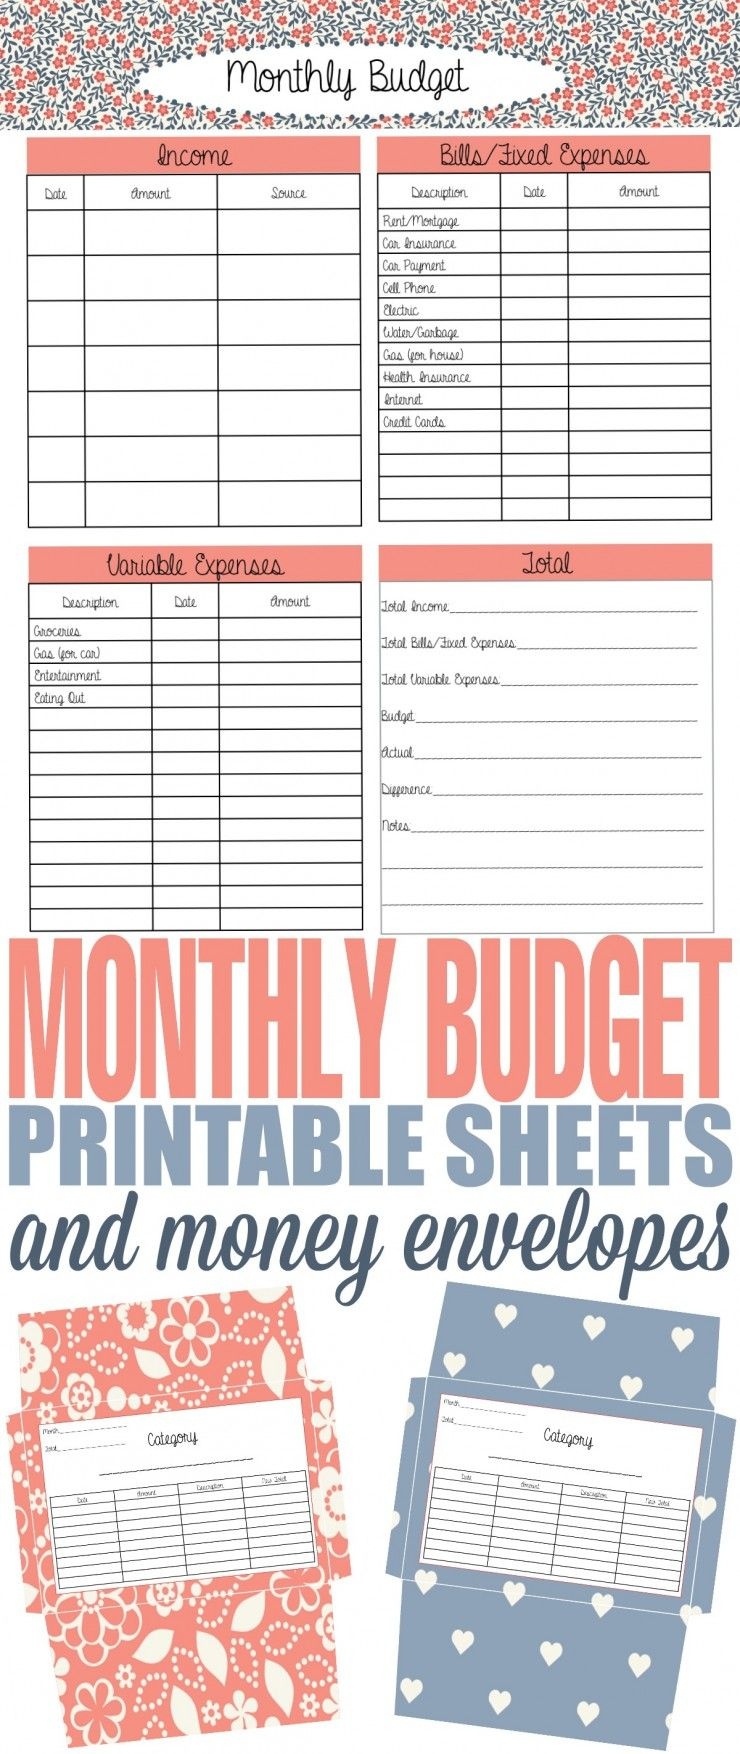 How To Budget And Spend Wisely With An Envelope System | Budgeting - Free Printable Money Envelopes